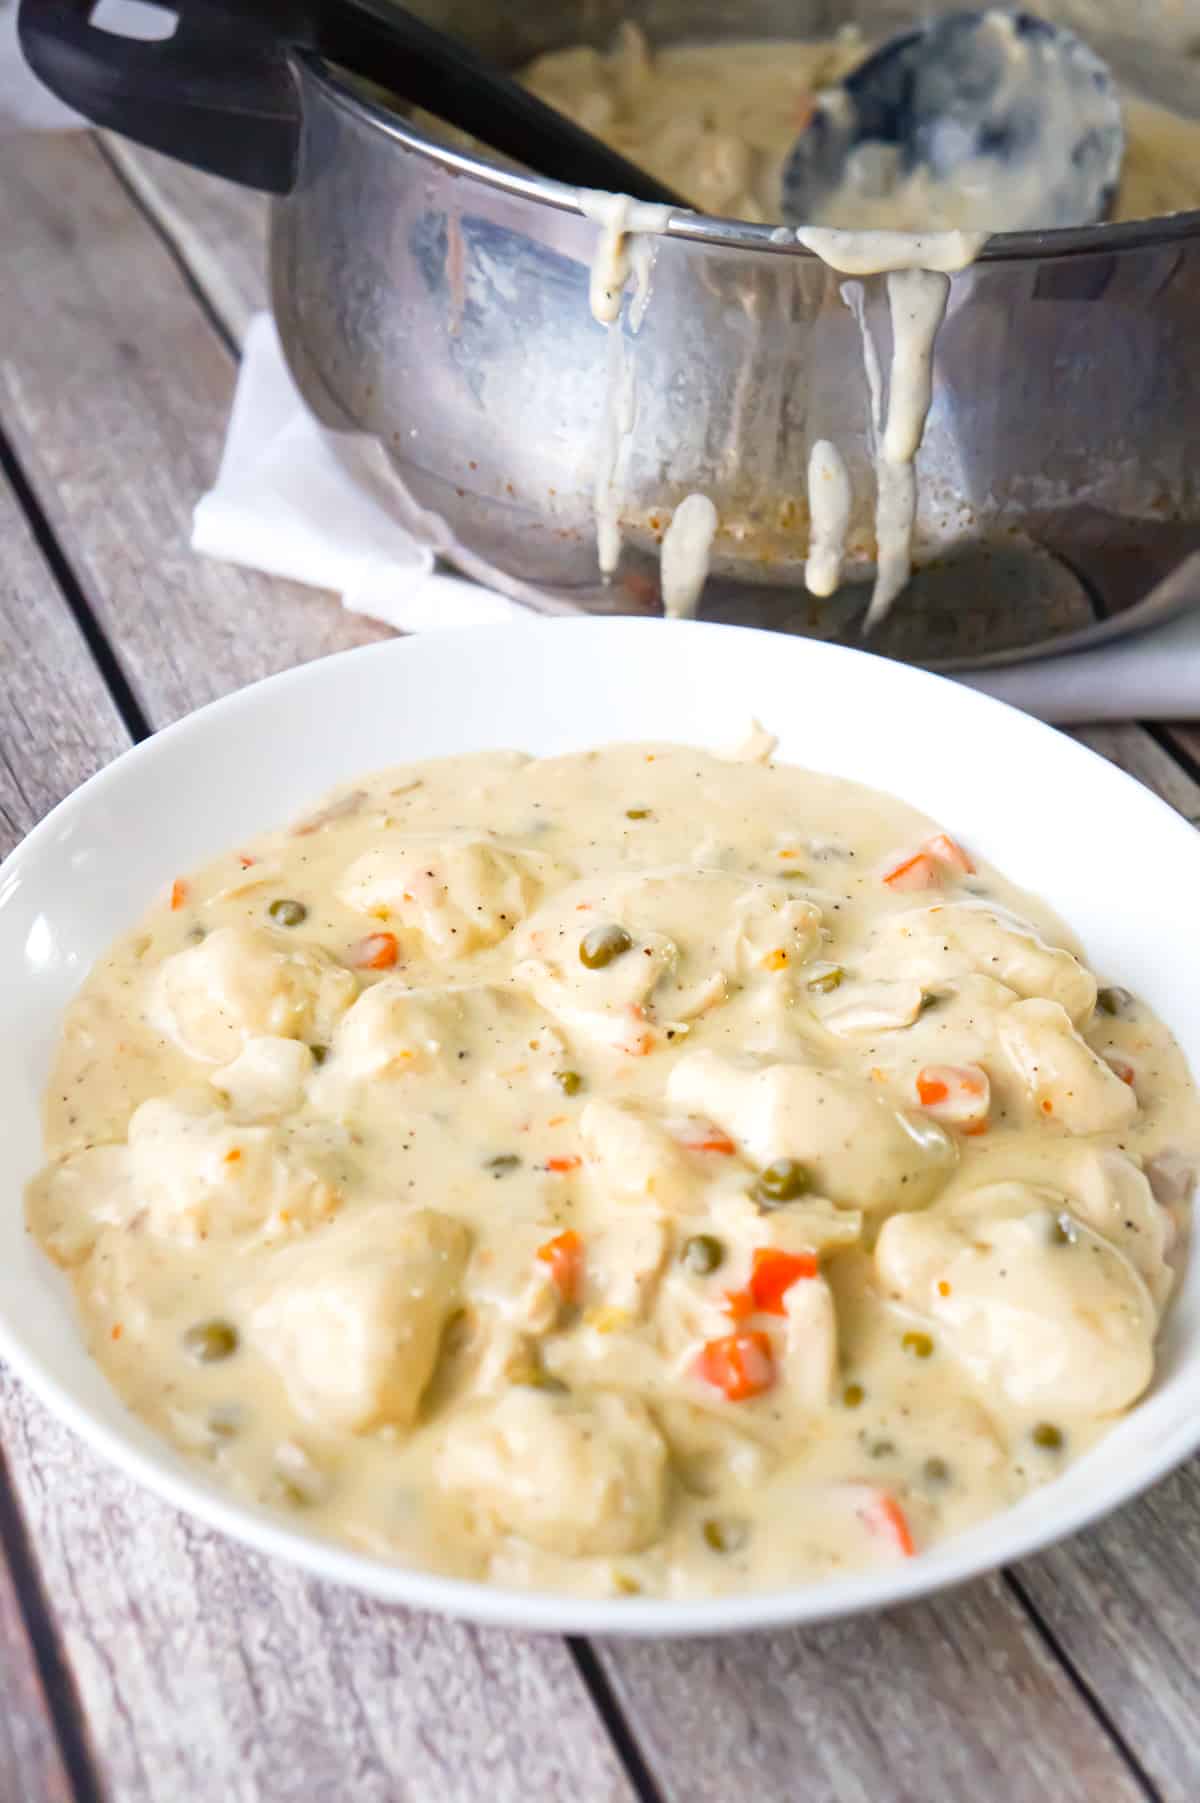 Easy Chicken and Dumplings with Biscuits is a hearty dinner recipe loaded with shredded chicken, Pillsbury biscuit pieces, peas and carrots all in a thick and creamy sauce.